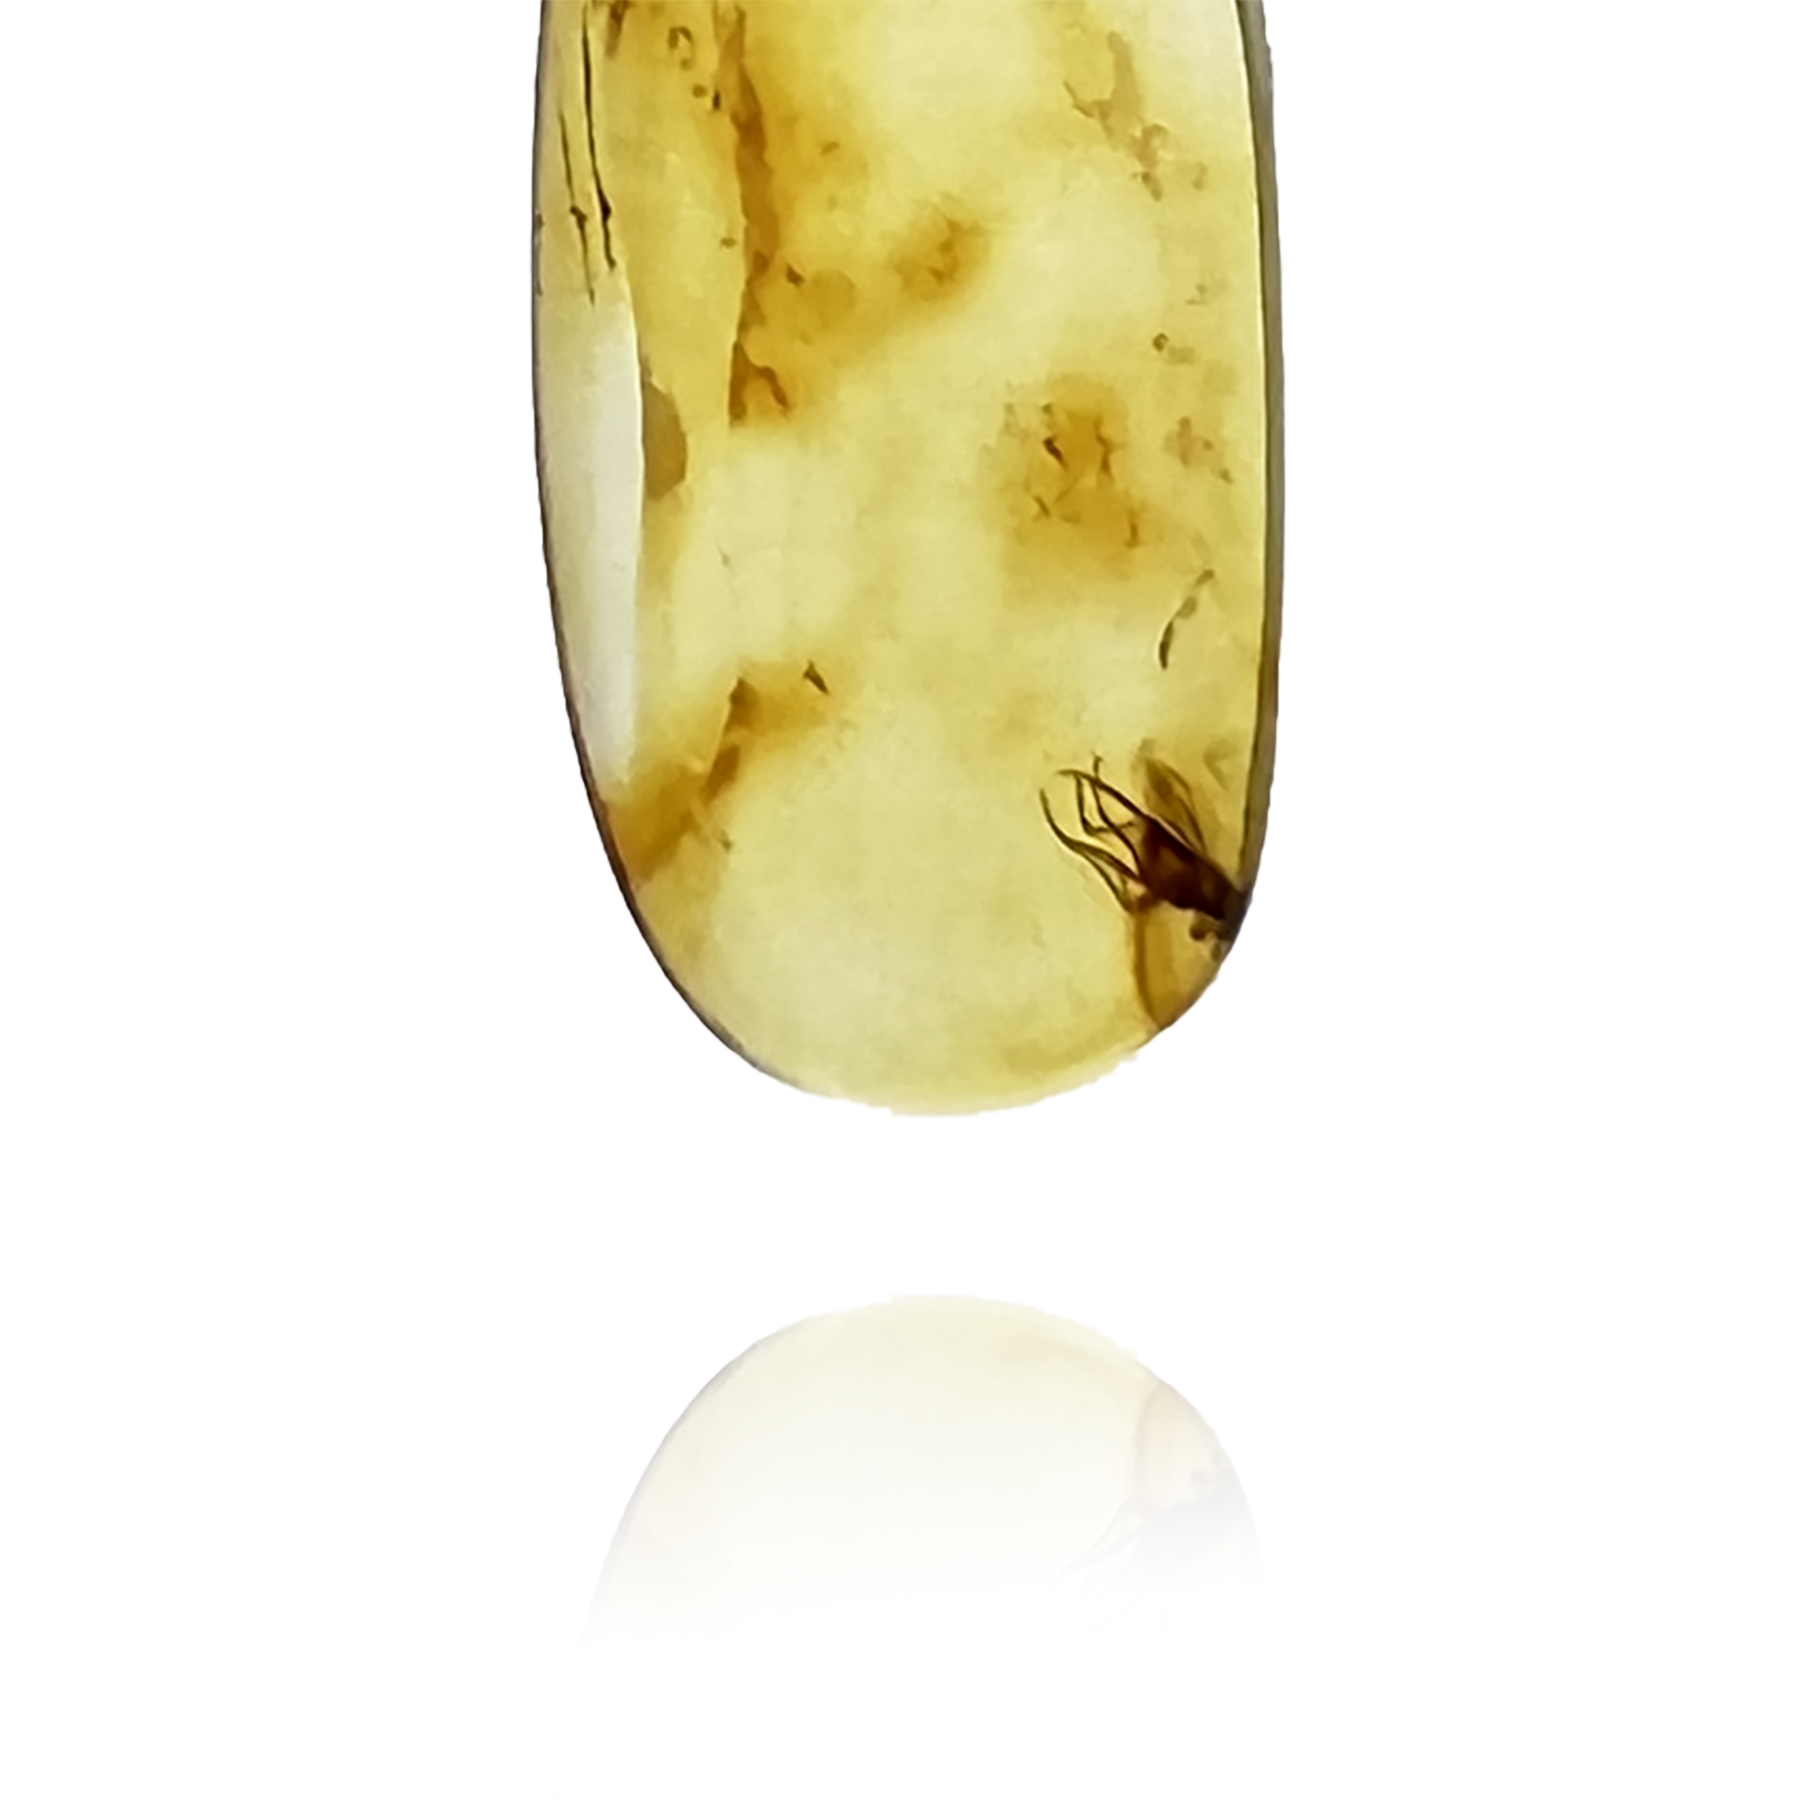 Amber pendant with inclusion "Descent"